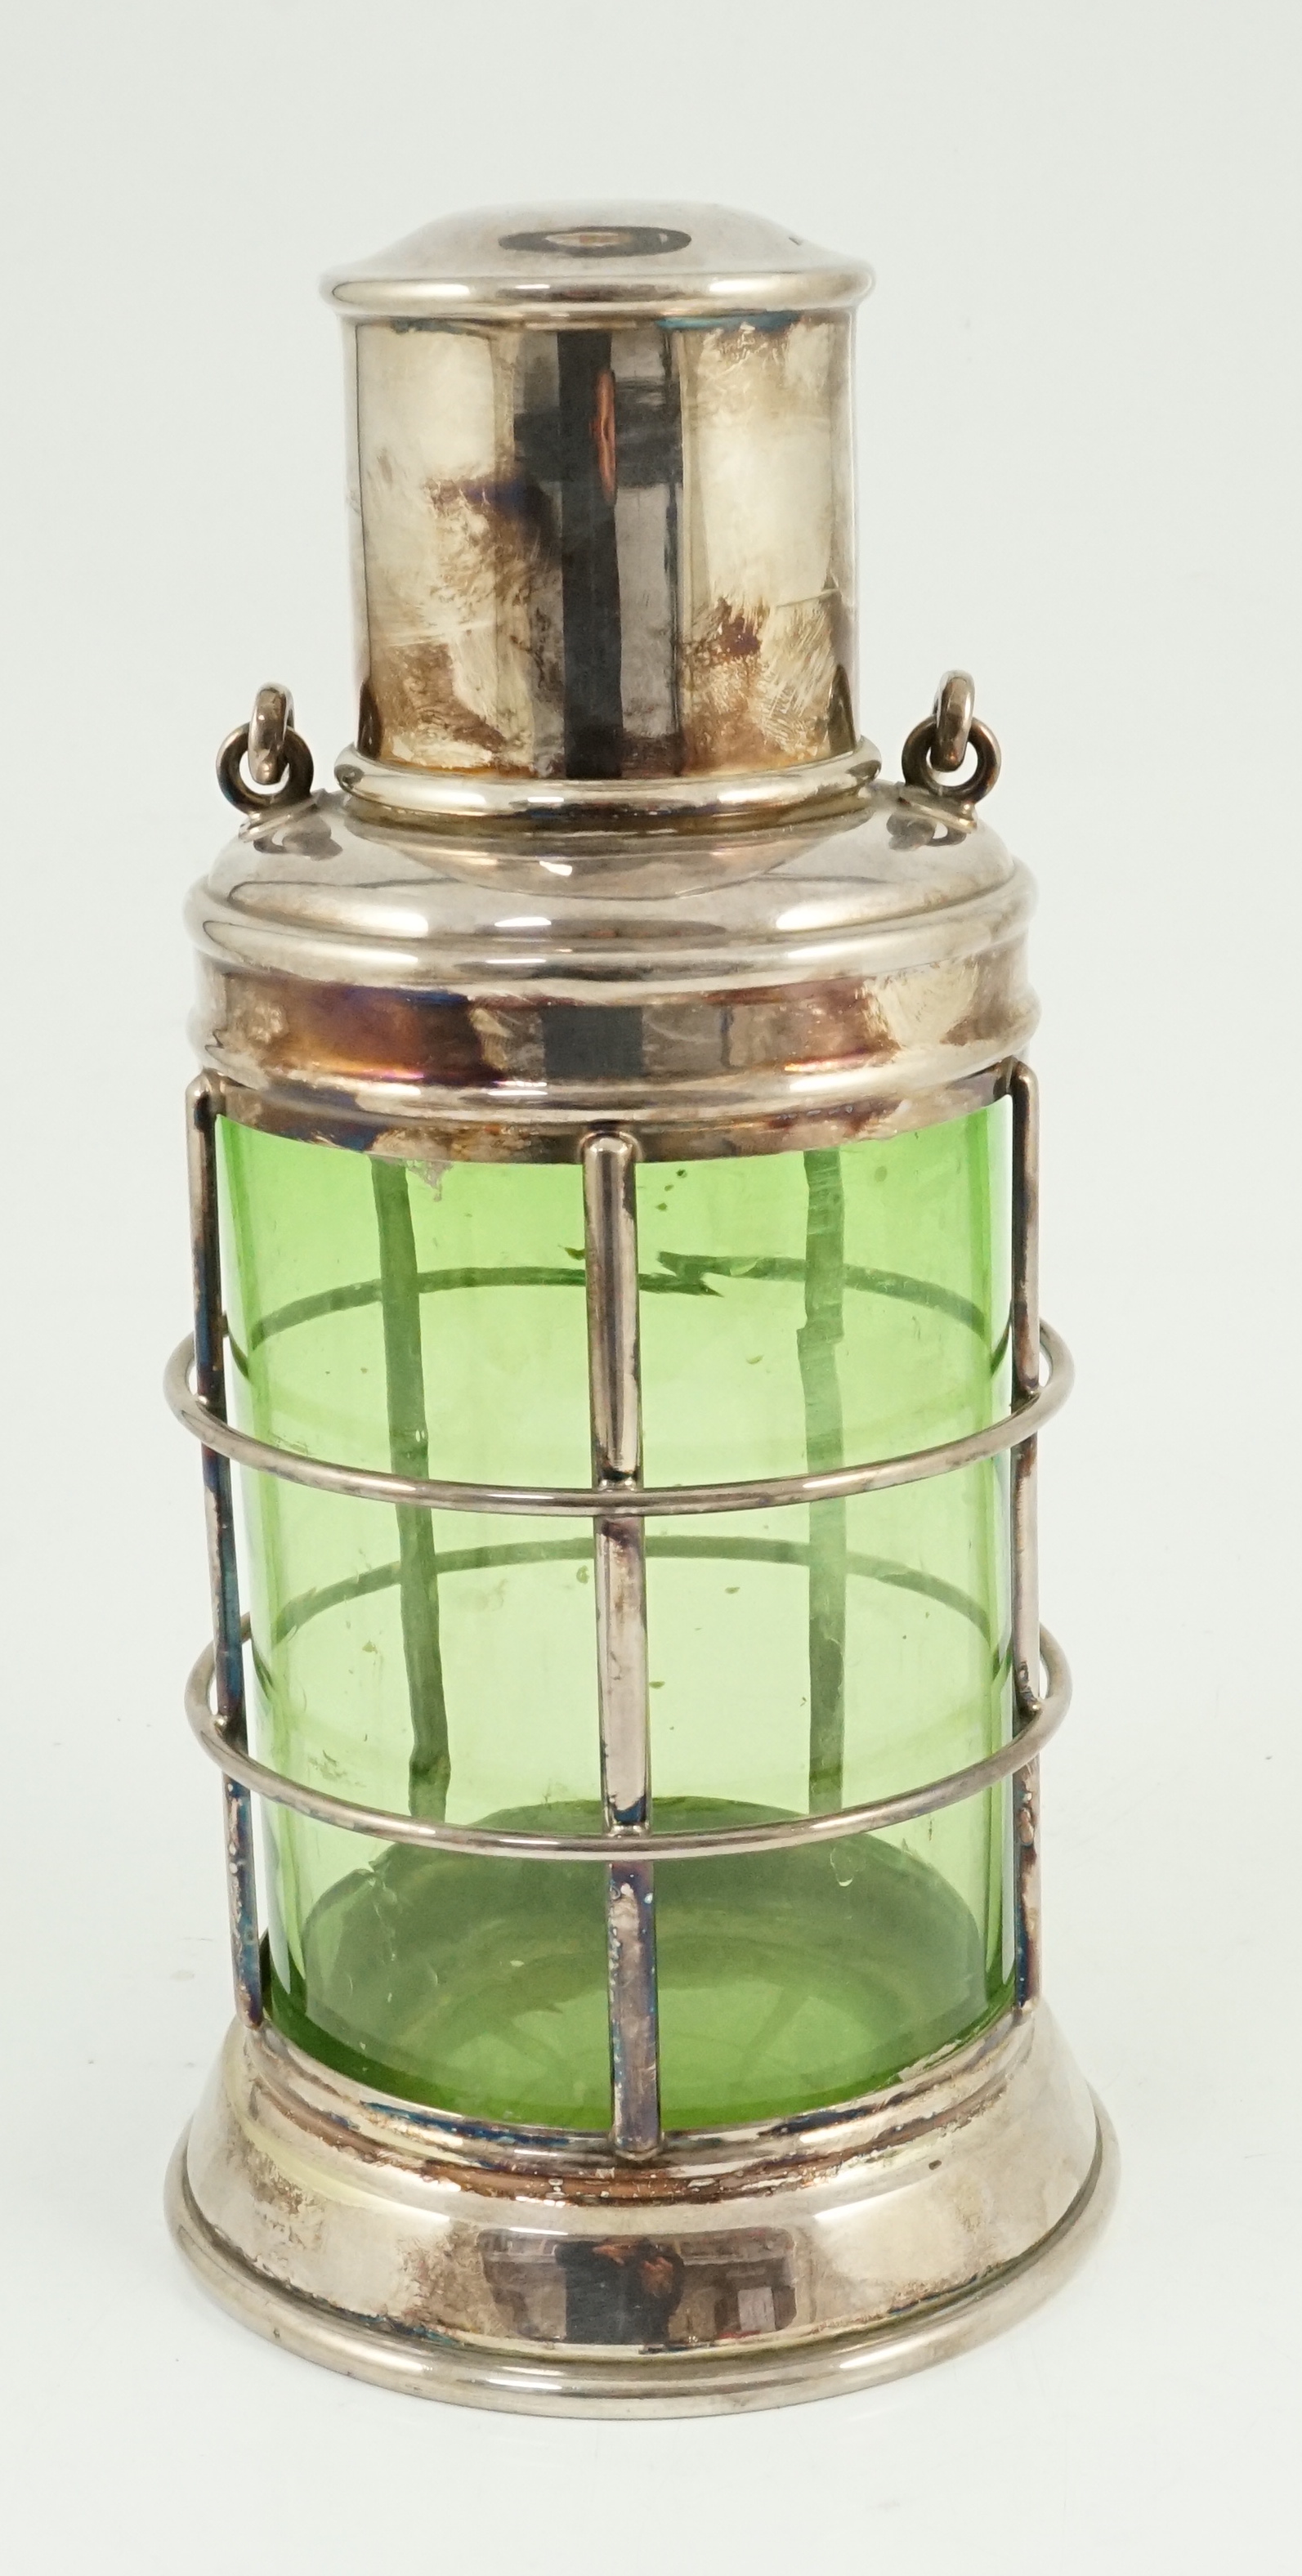 An Asprey & Co. silver plated and green glass novelty cocktail shaker in the form of a lantern